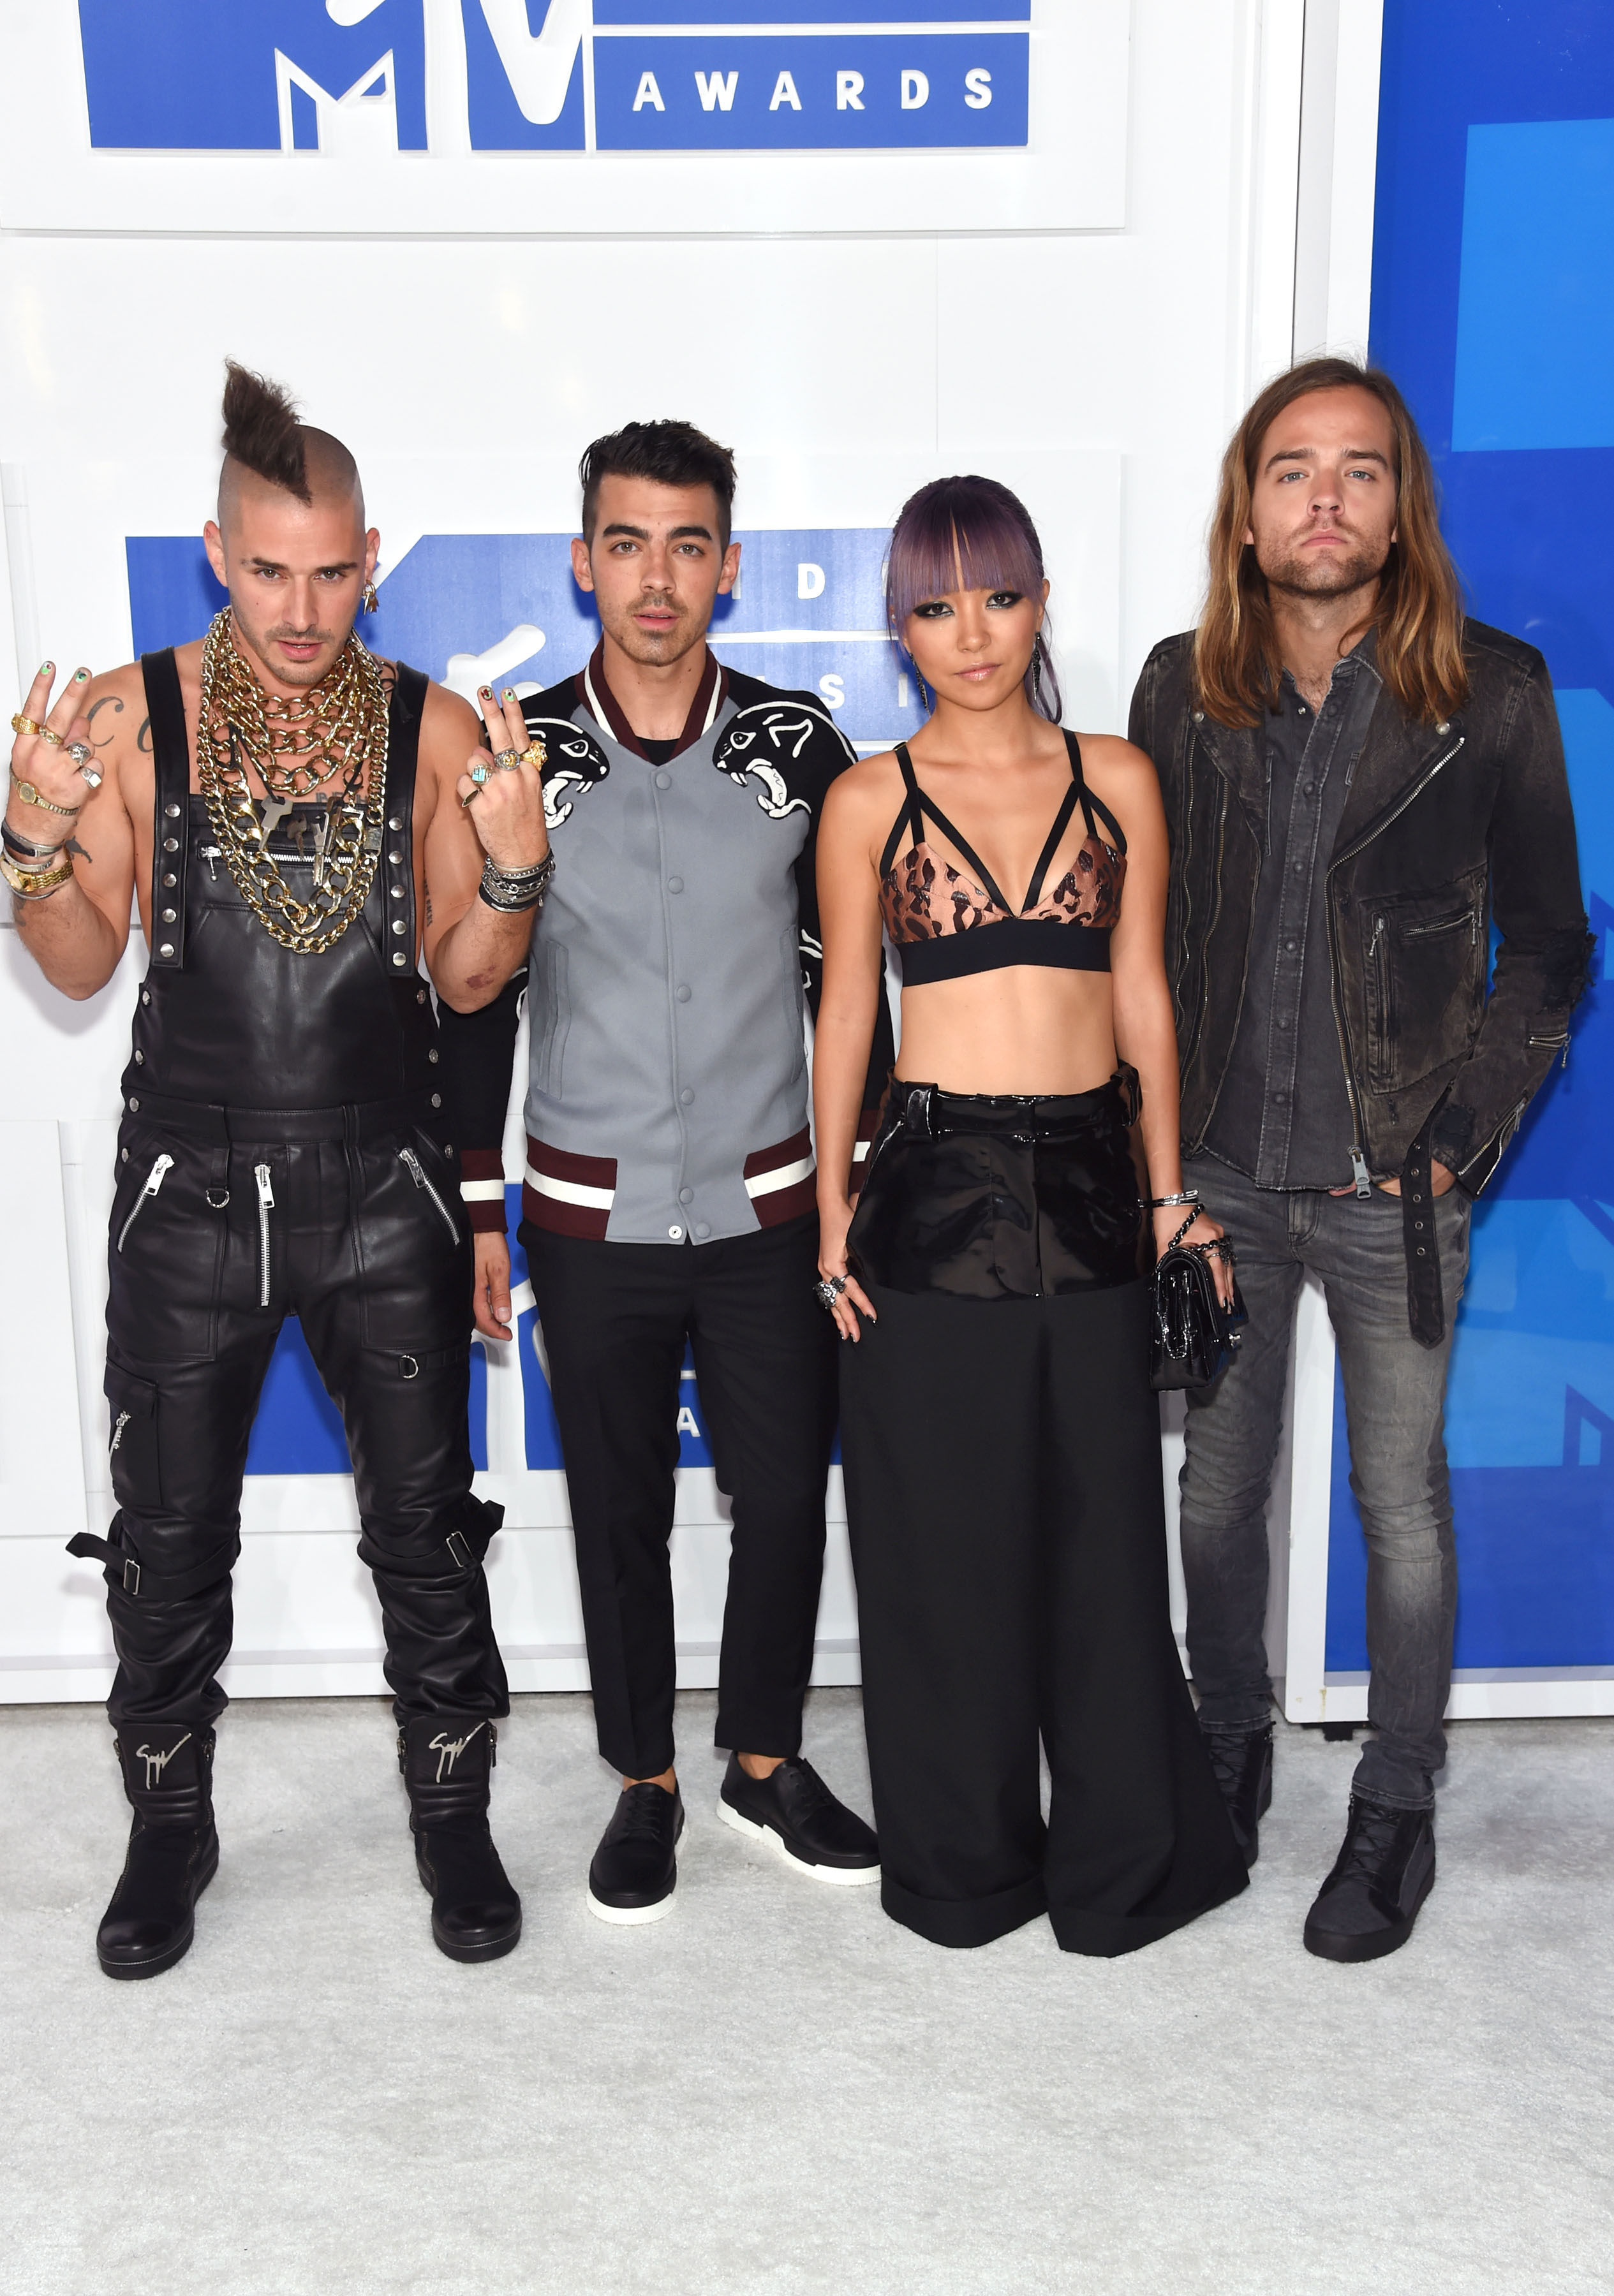 NEW YORK, NY - AUGUST 28: (L-R) Cole Whittle, Joe Jonas, JinJoo Lee, Jack Lawless of DNCE attend the 2016 MTV Video Music Awards at Madison Square Garden on August 28, 2016 in New York City. Jamie McCarthy/Getty Images/AFP